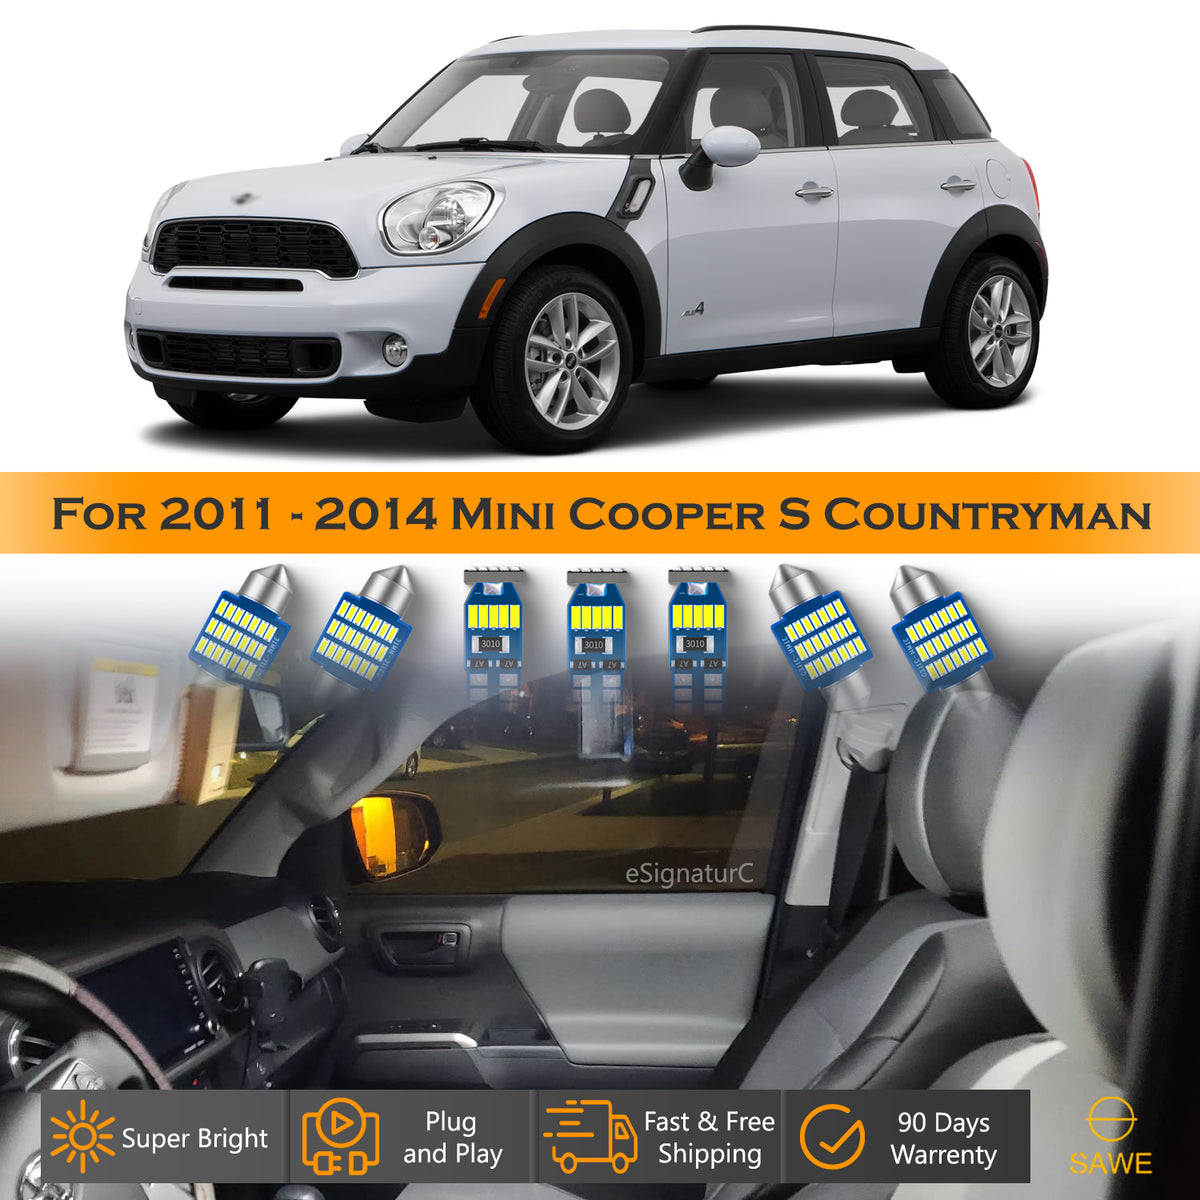 For Mini Cooper Countryman Interior LED Lights - Dome & Map Light Bulb Package Kit for 2011 - 2014 - White